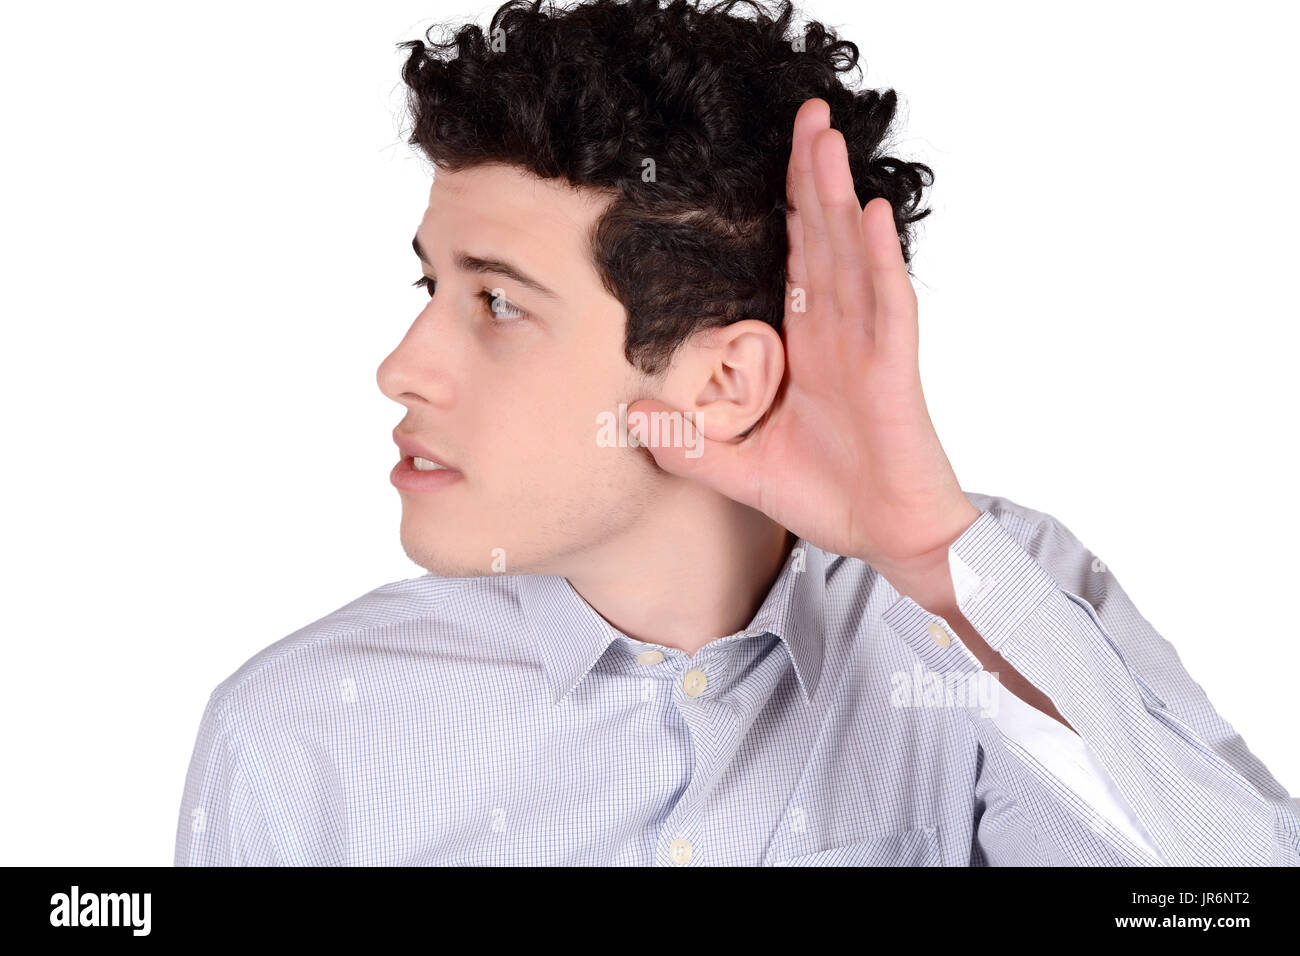 Portrait of attractive young man hearing something. Isolated white background. Stock Photo